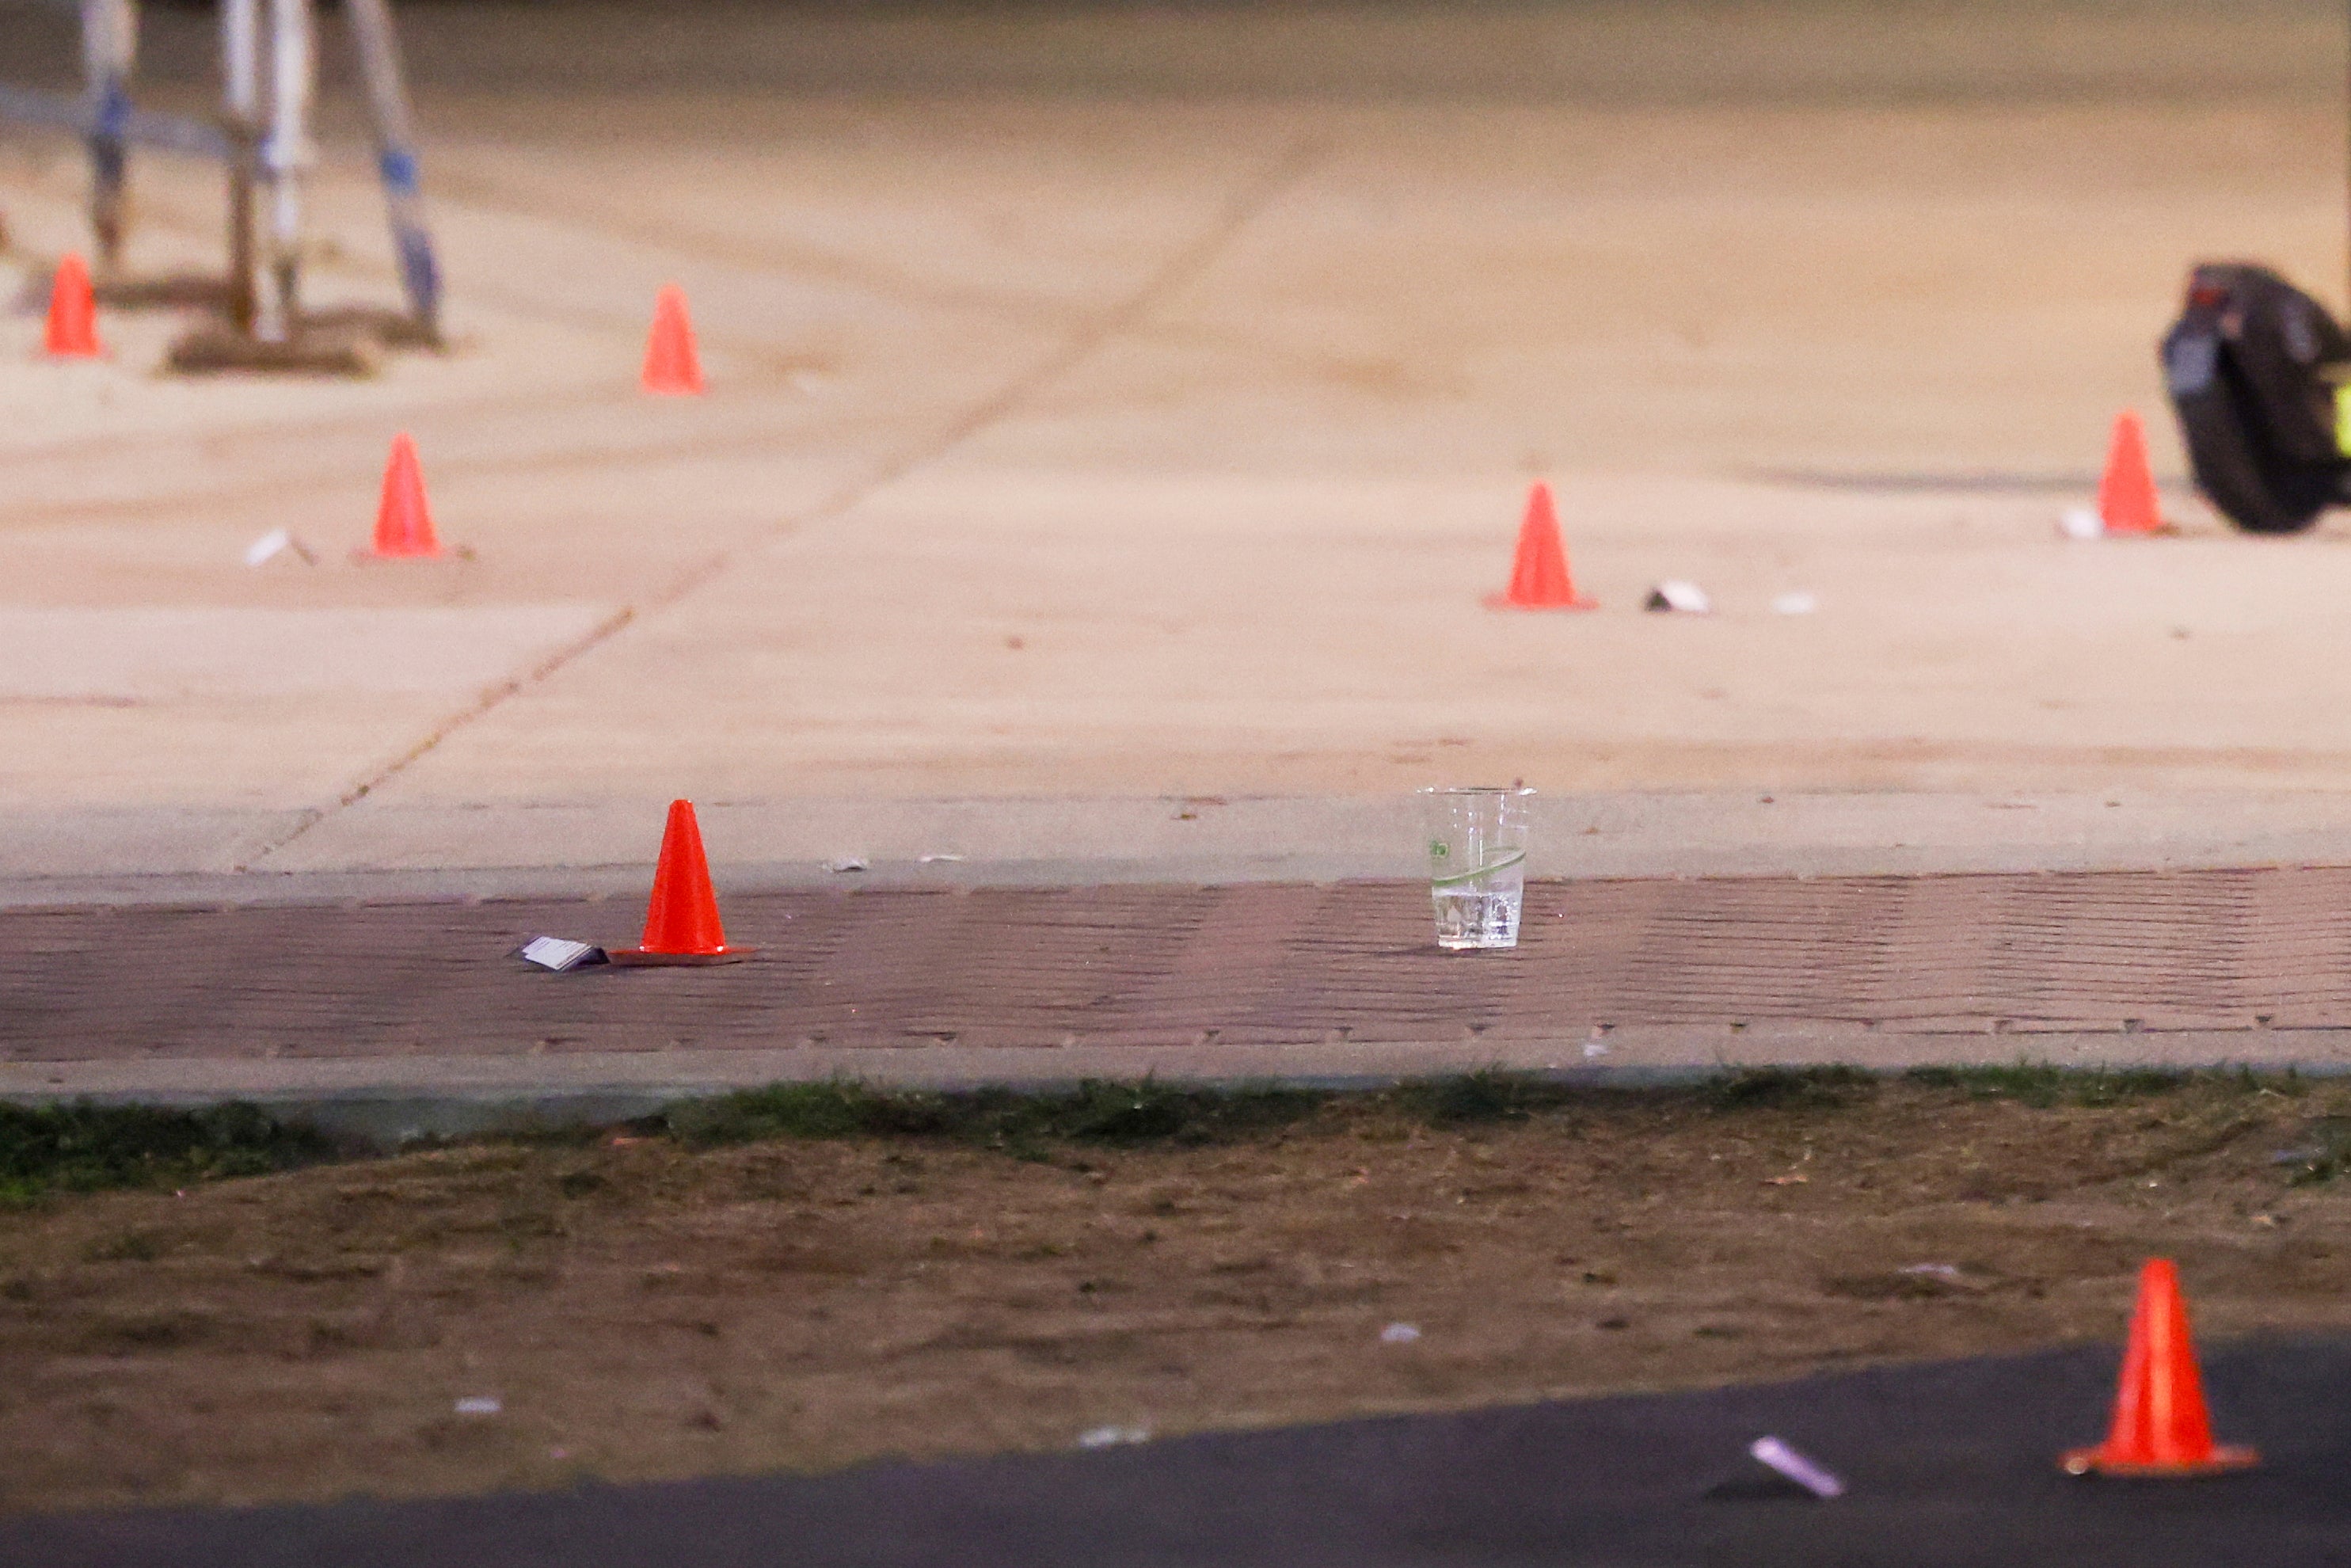 Evidence markers are pictured outside a building at Morgan State University